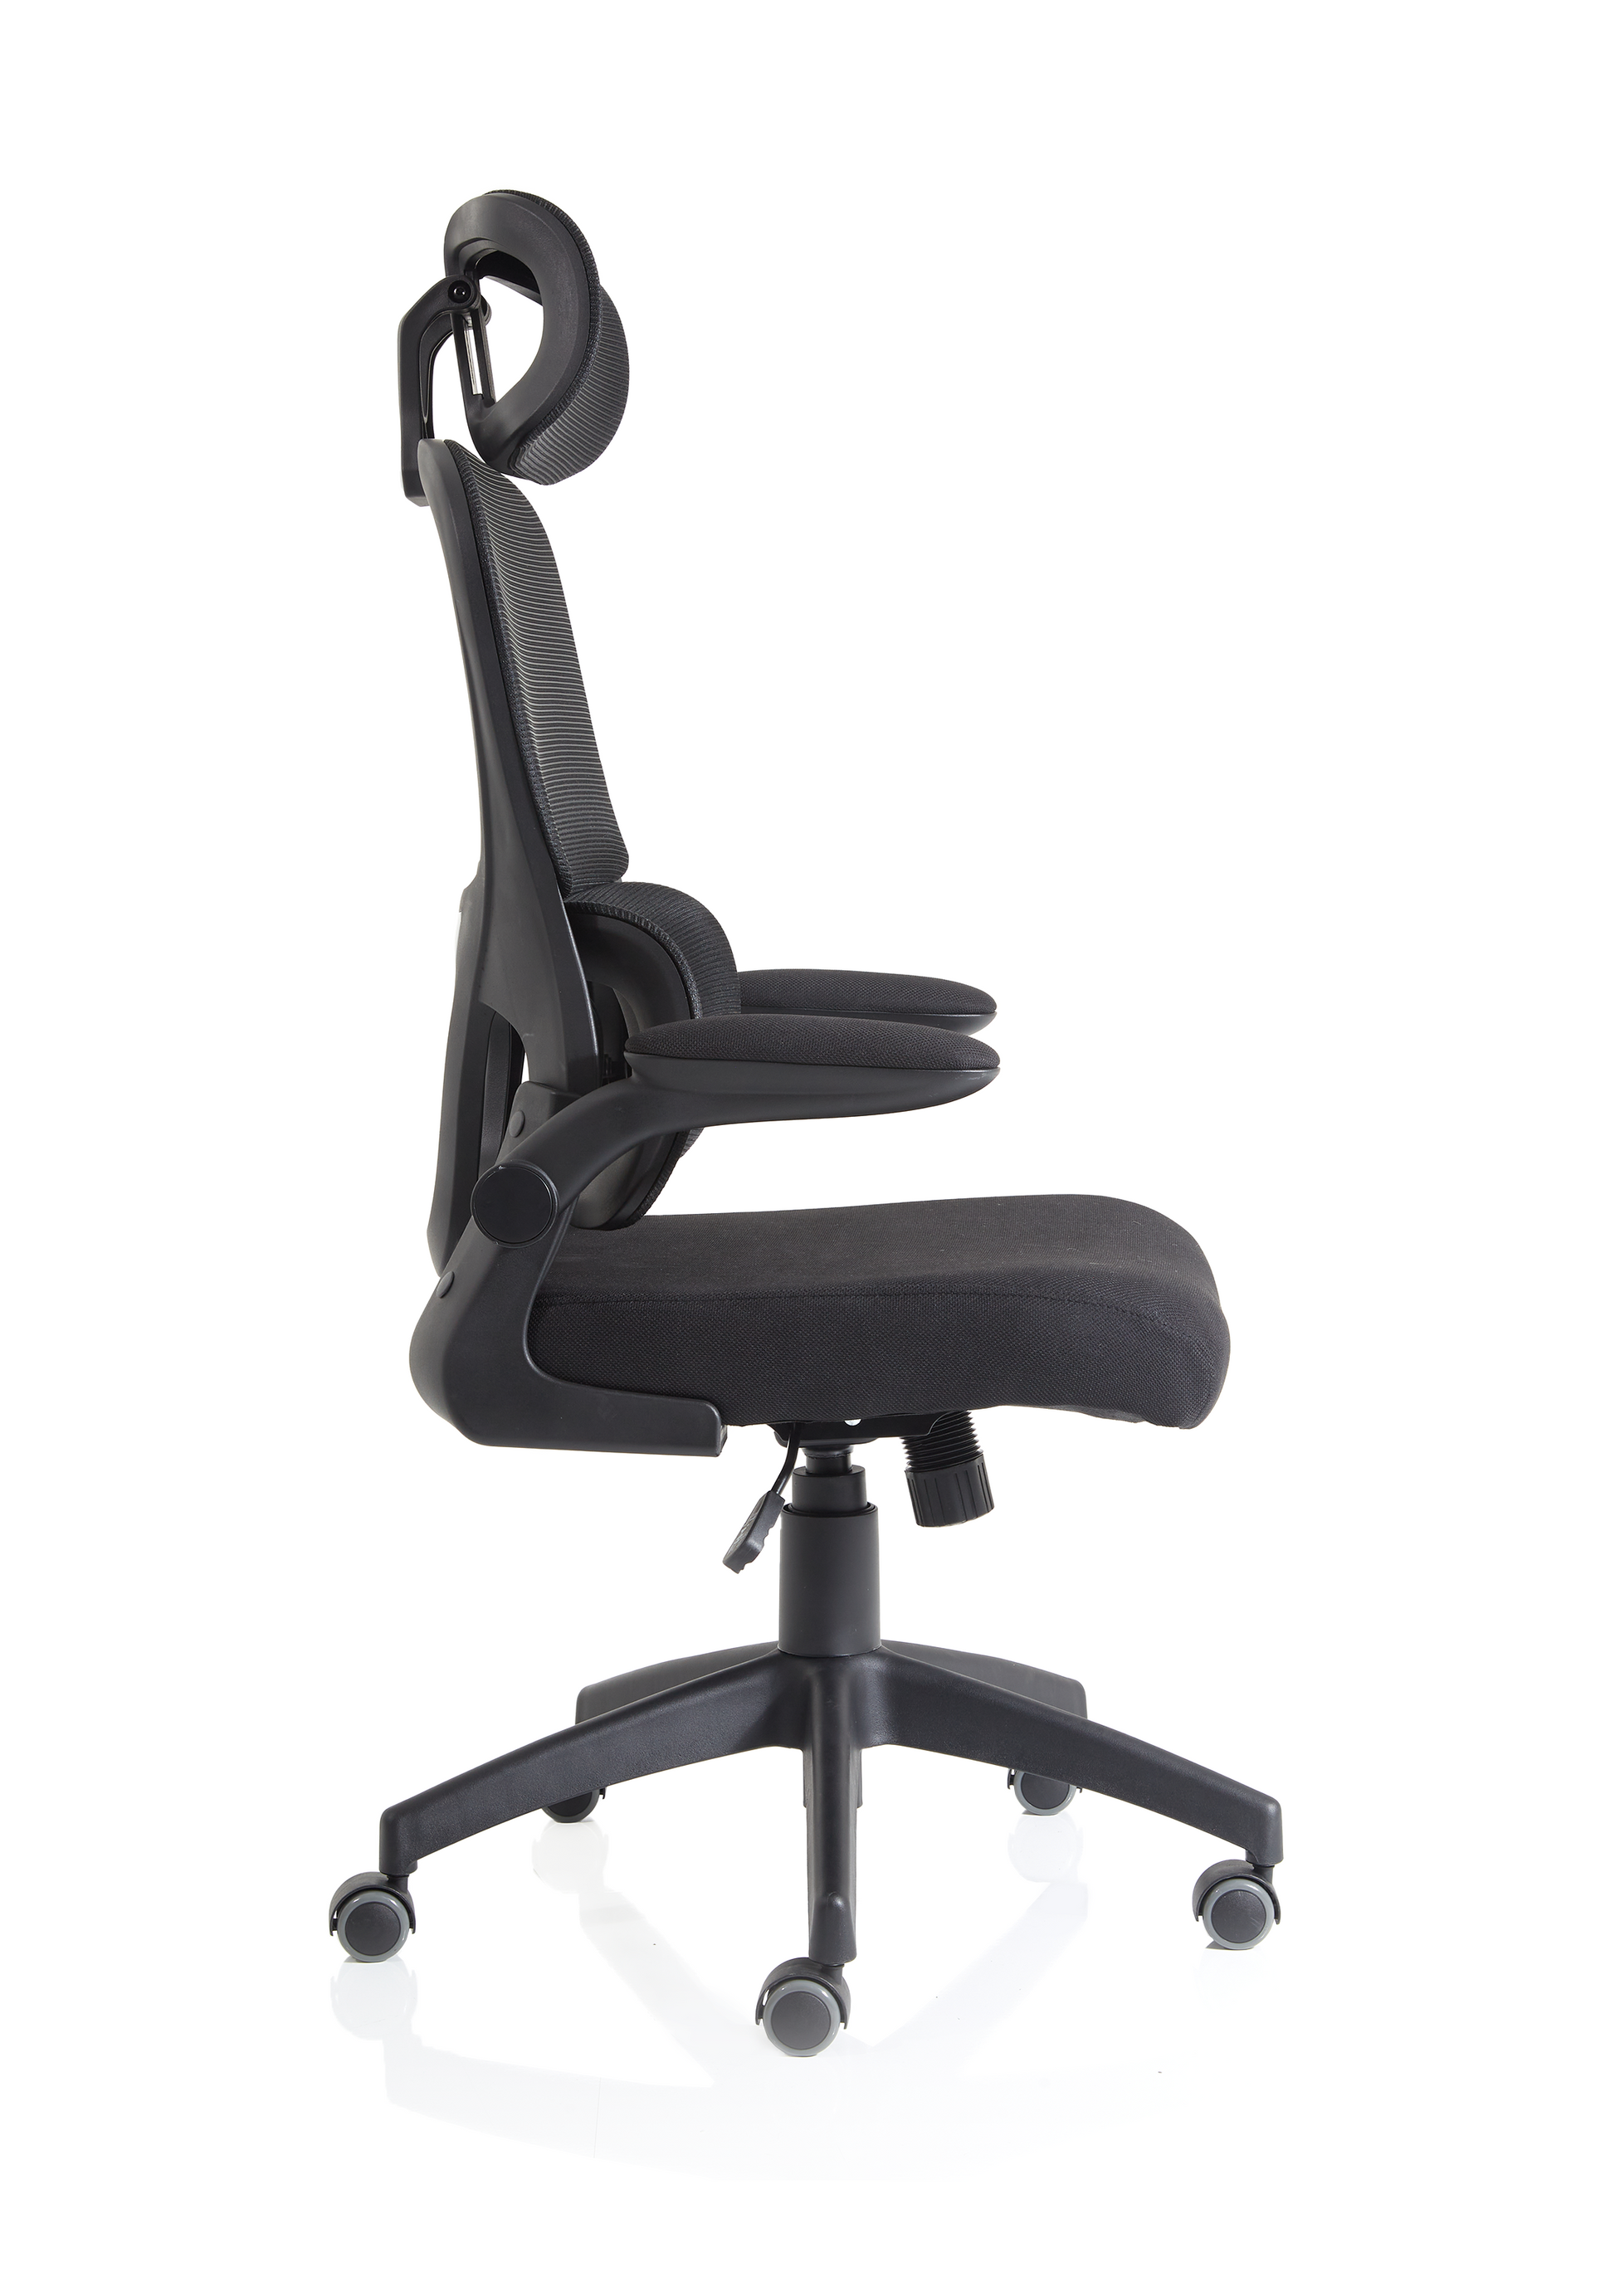 Isairis Ergonomic Office Chair with Adjustable Headrest and Armrests